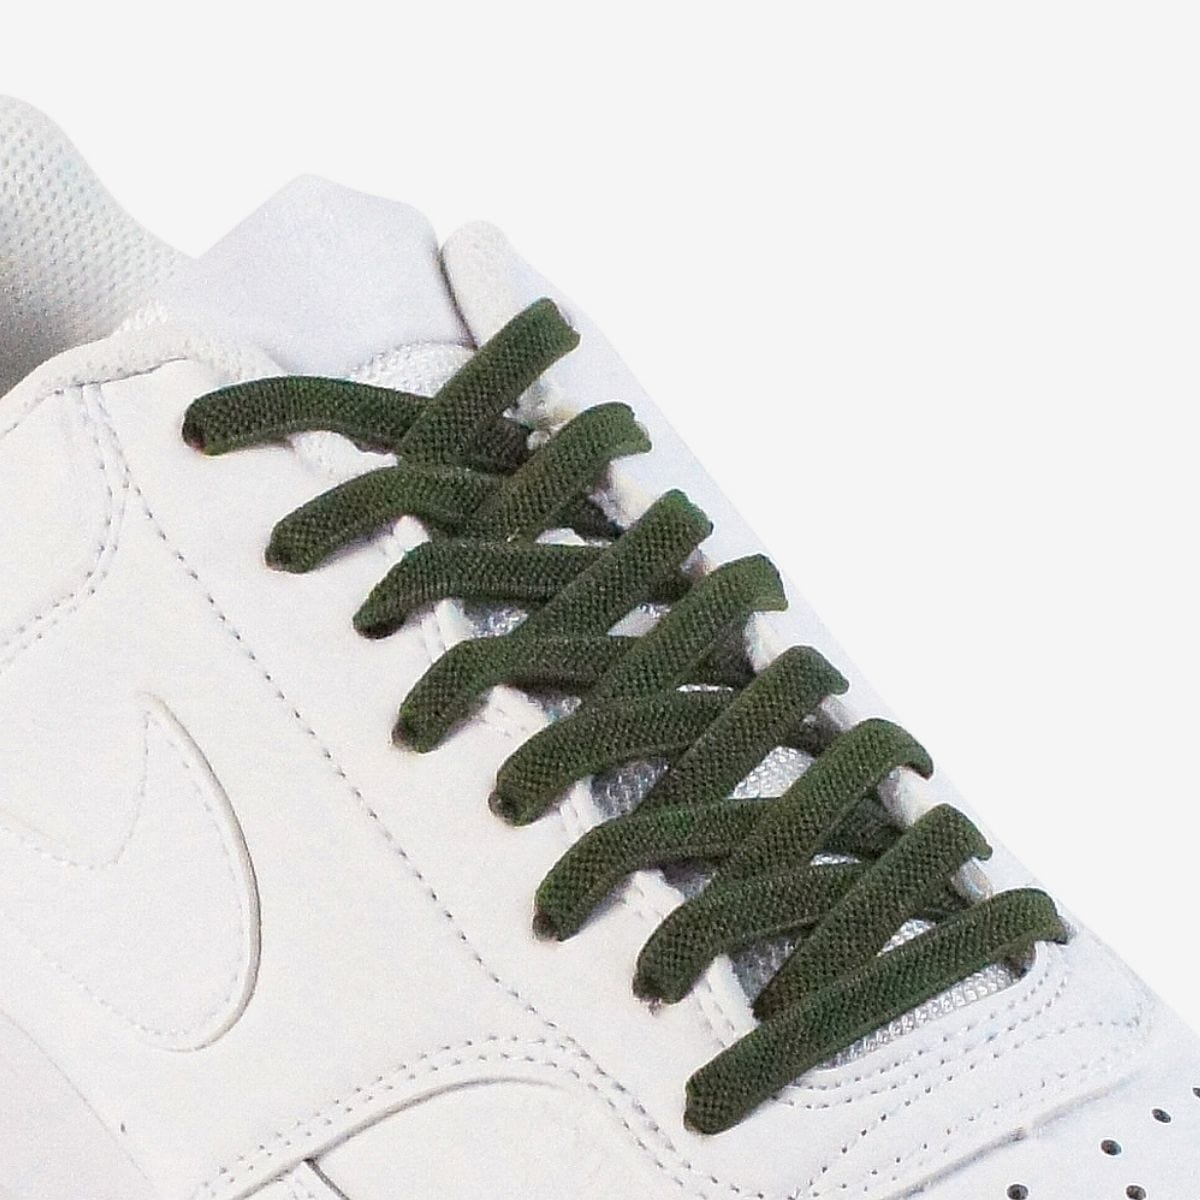 kids-no-tie-shoelaces-with-army-green-laces-on-nike-white-sneakers-by-kicks-shoelaces